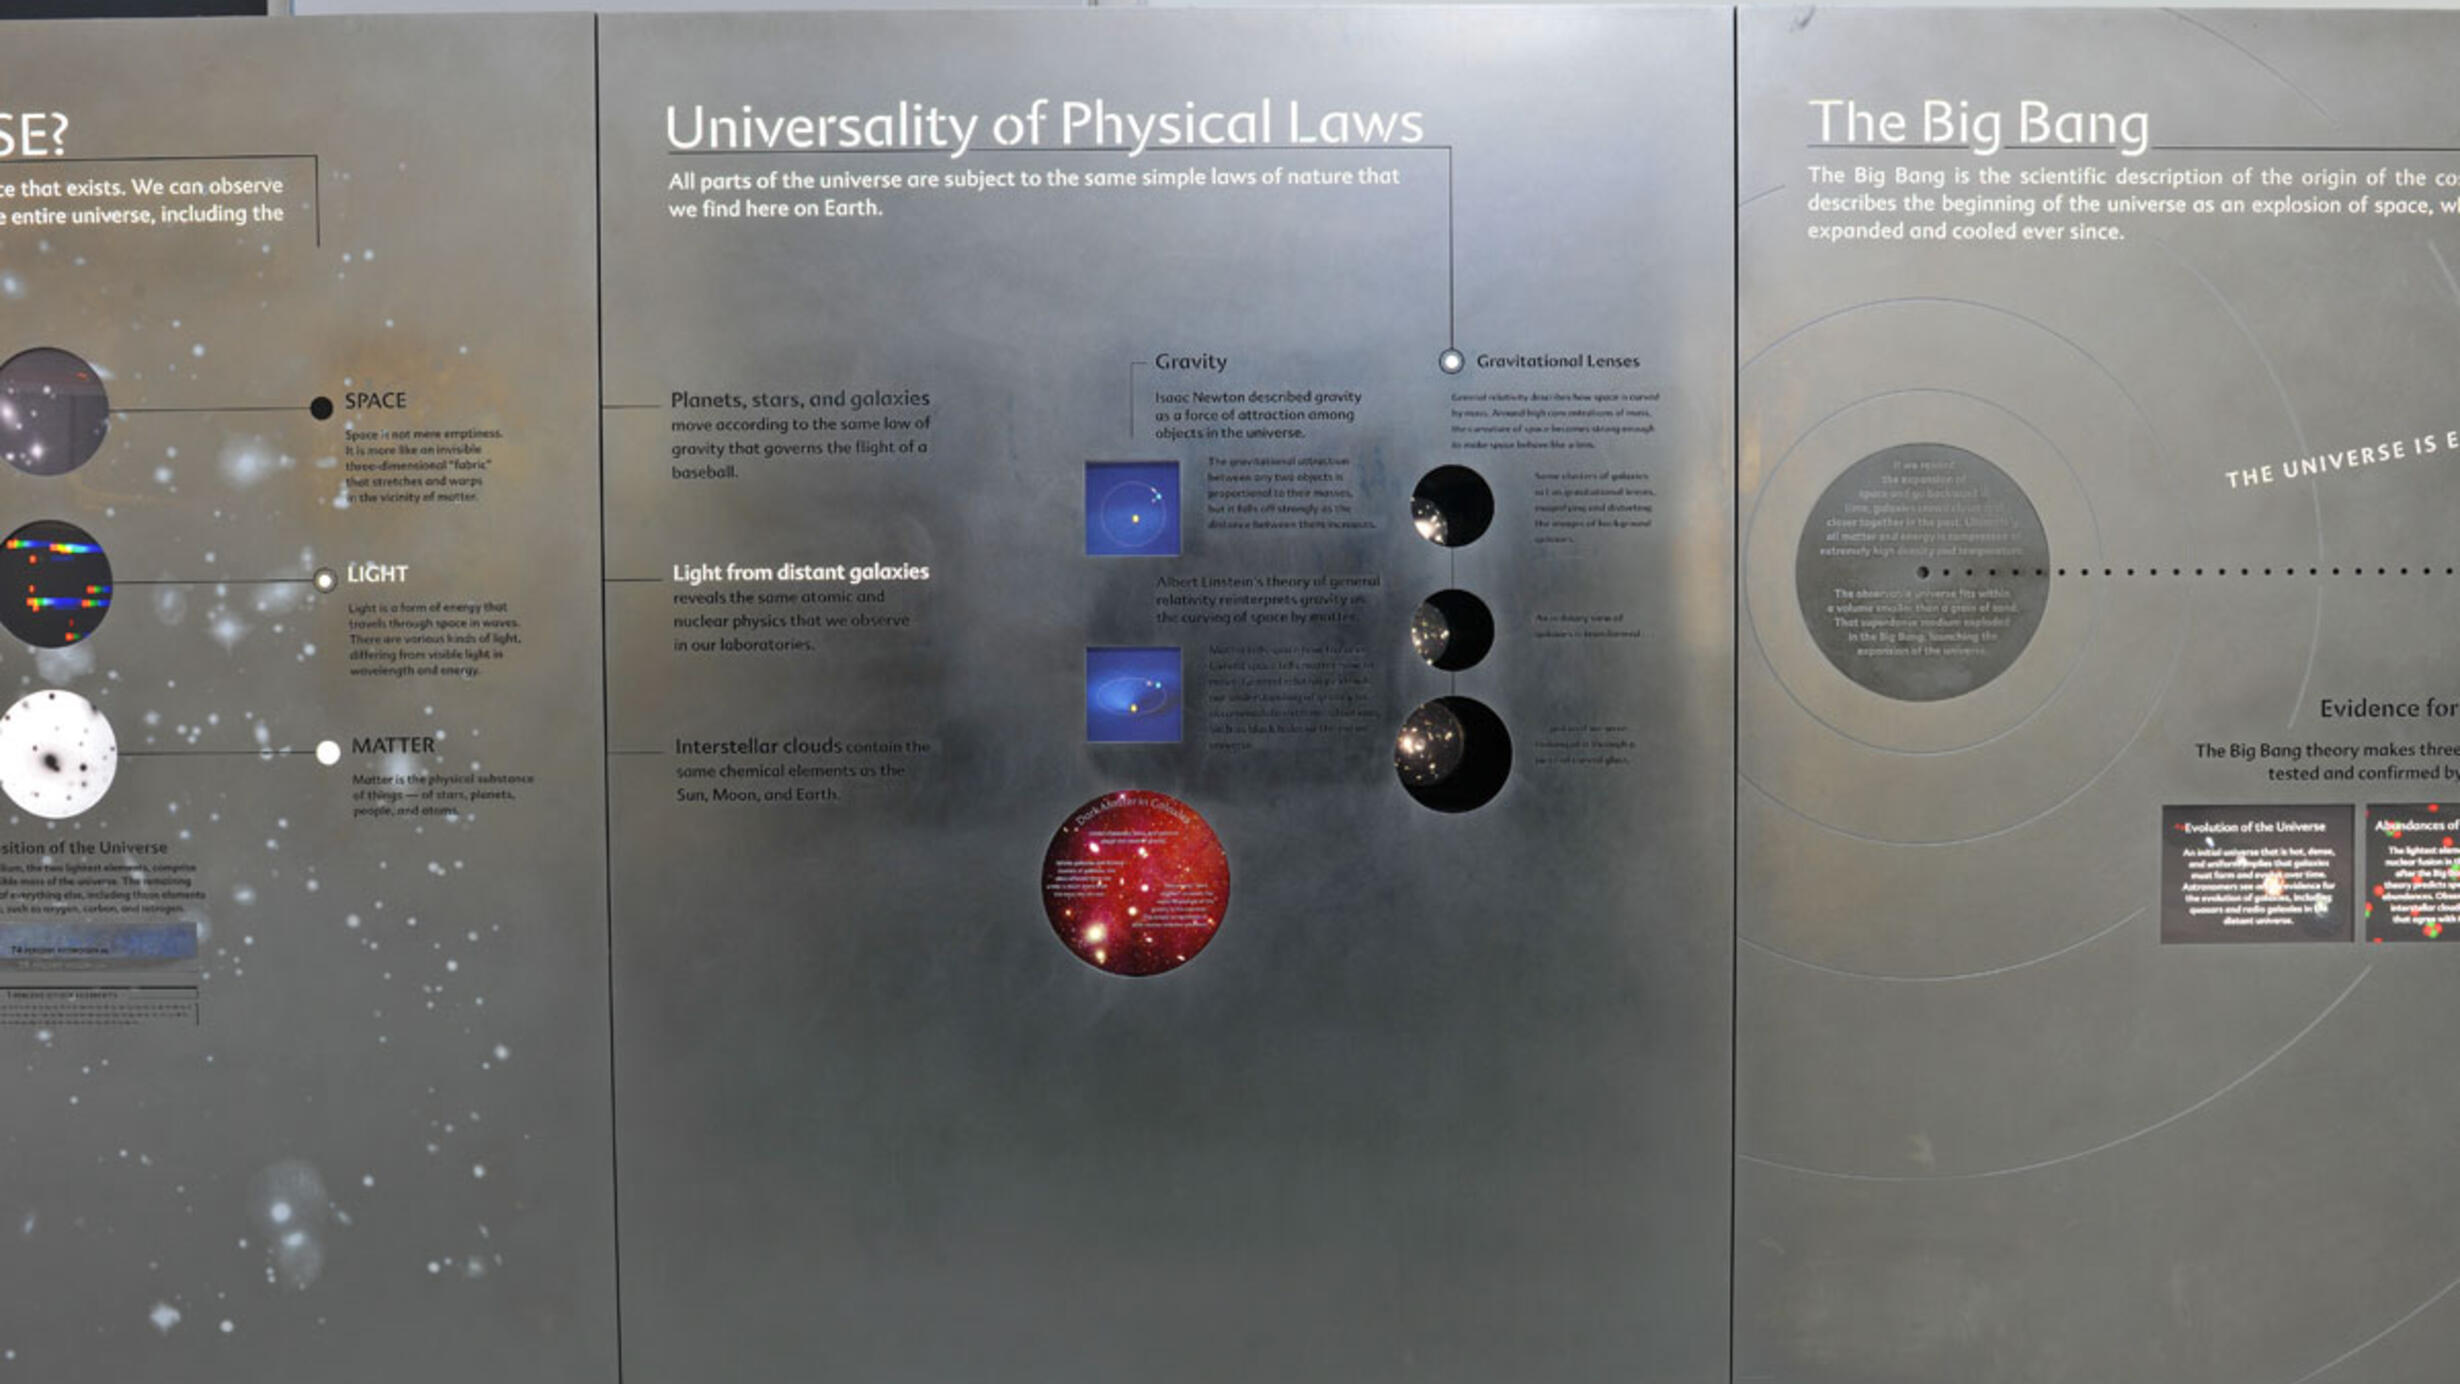 Universality of Physical Laws